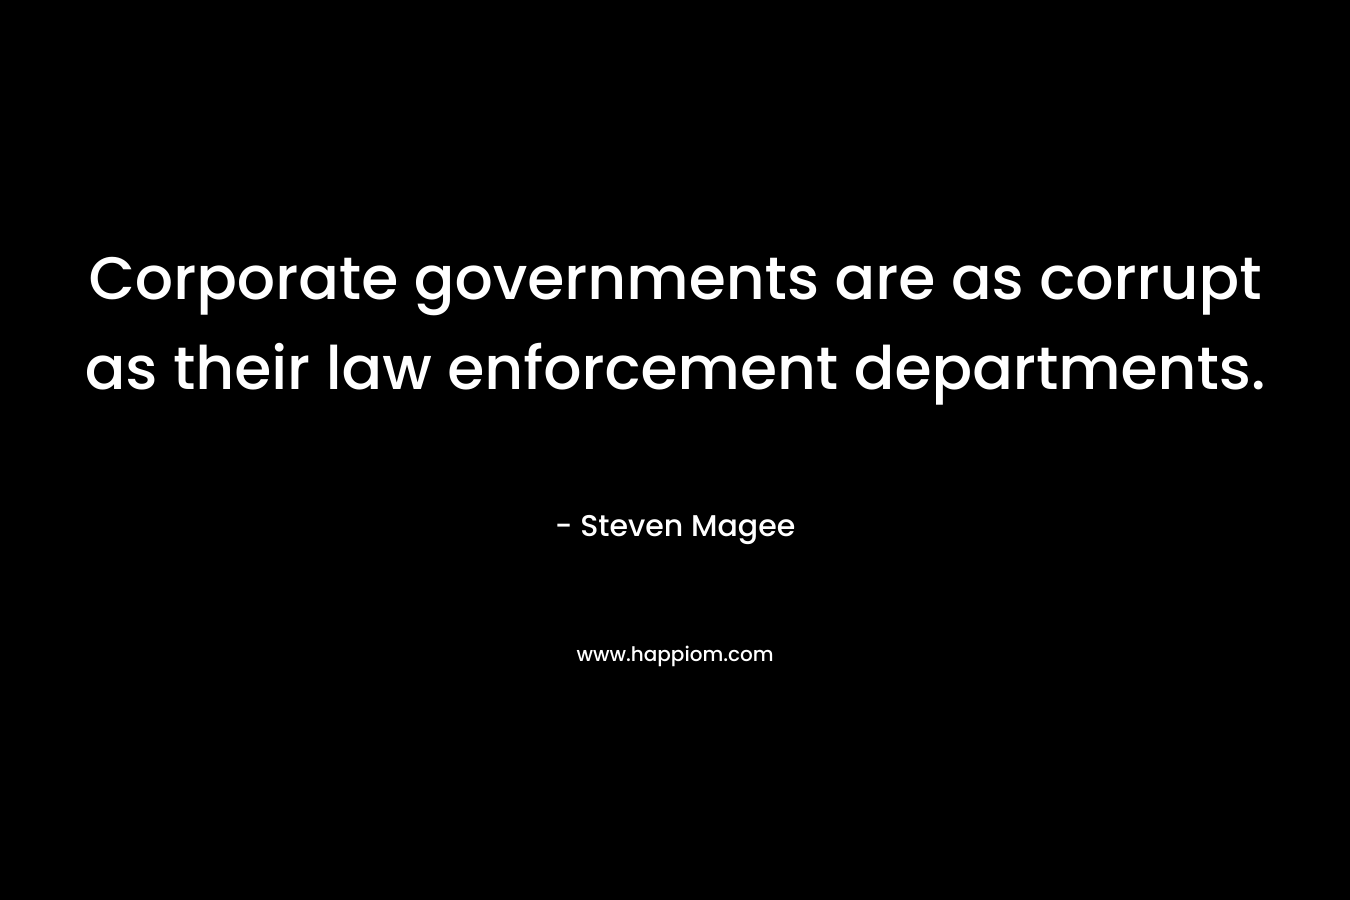 Corporate governments are as corrupt as their law enforcement departments. – Steven Magee